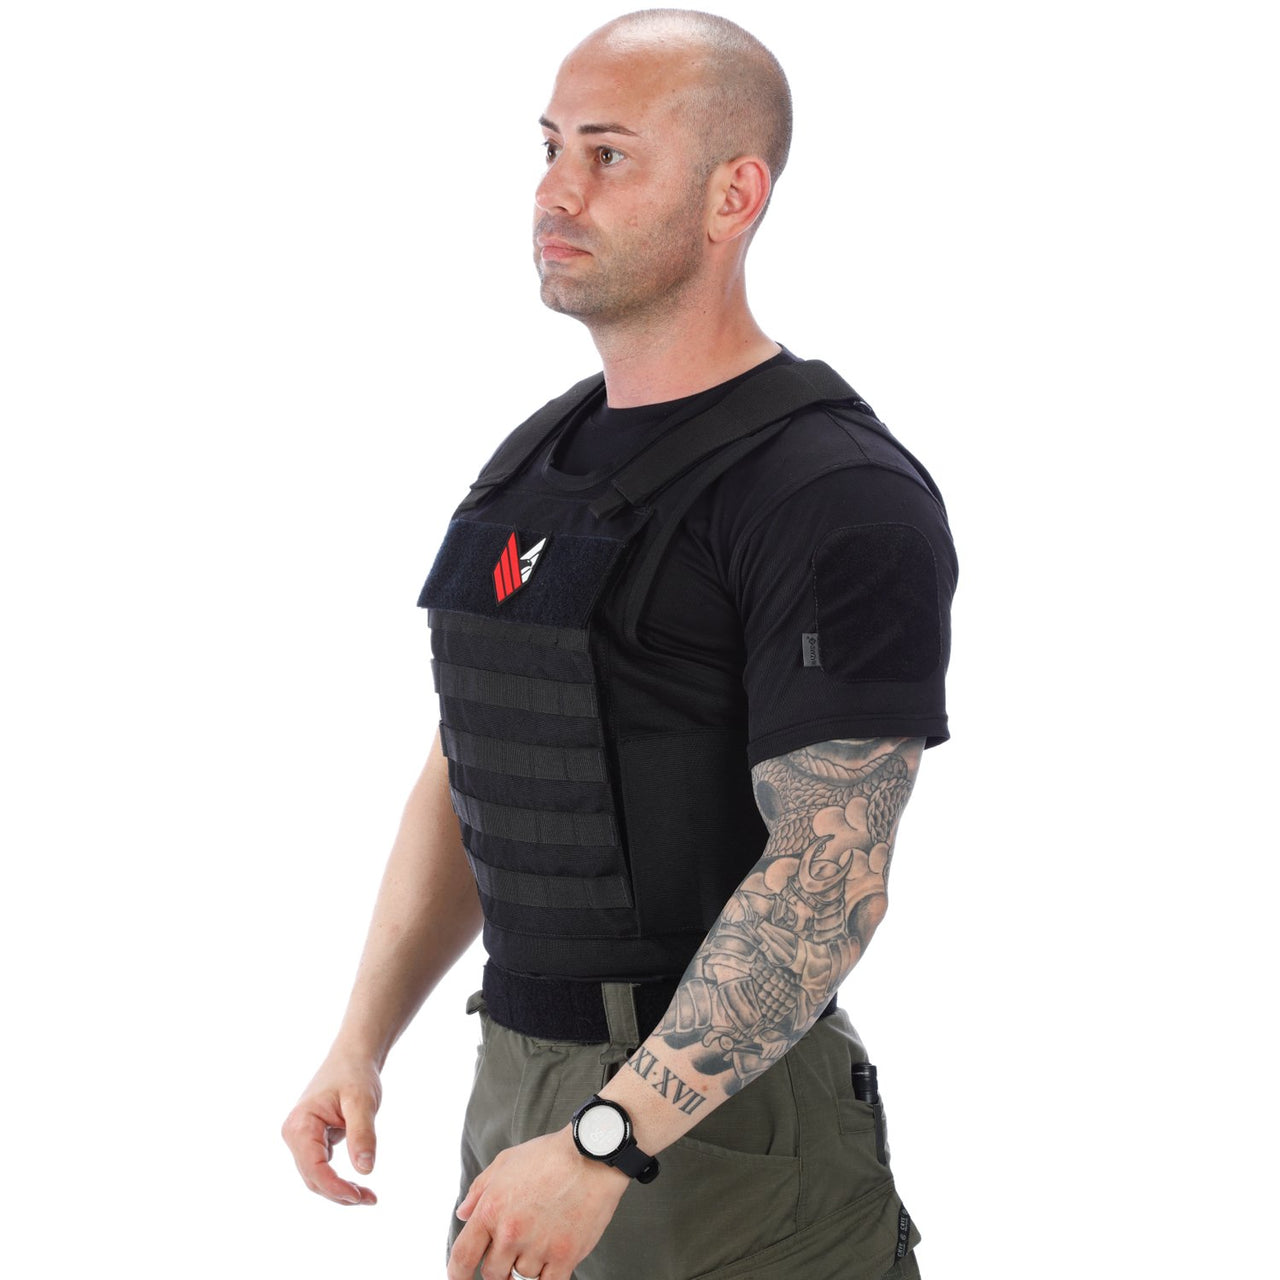 A man wearing a Body Armor Direct All Star Tactical Enhanced Multi-Threat Vest.